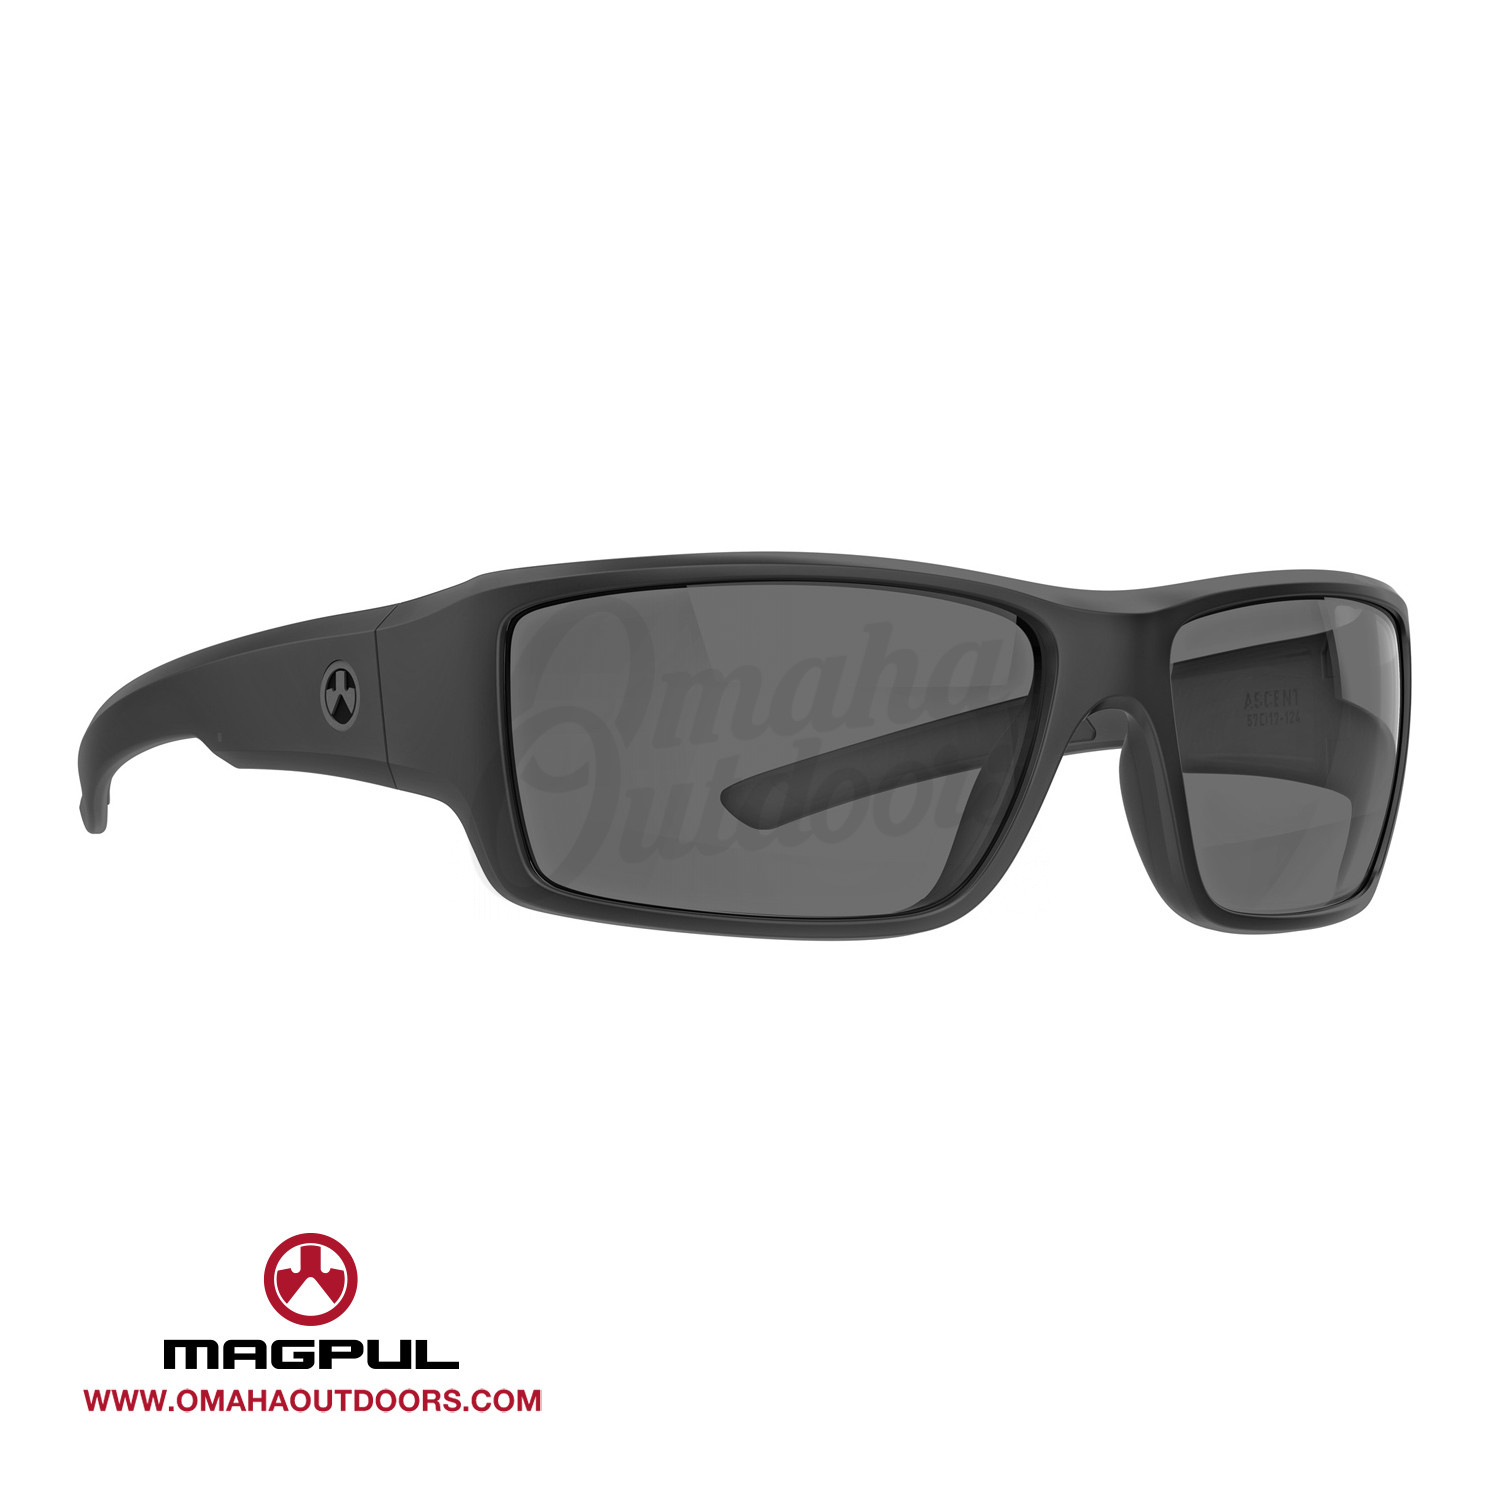 Green Sunglasses Lens Stock Magpul Gray - Ascent In